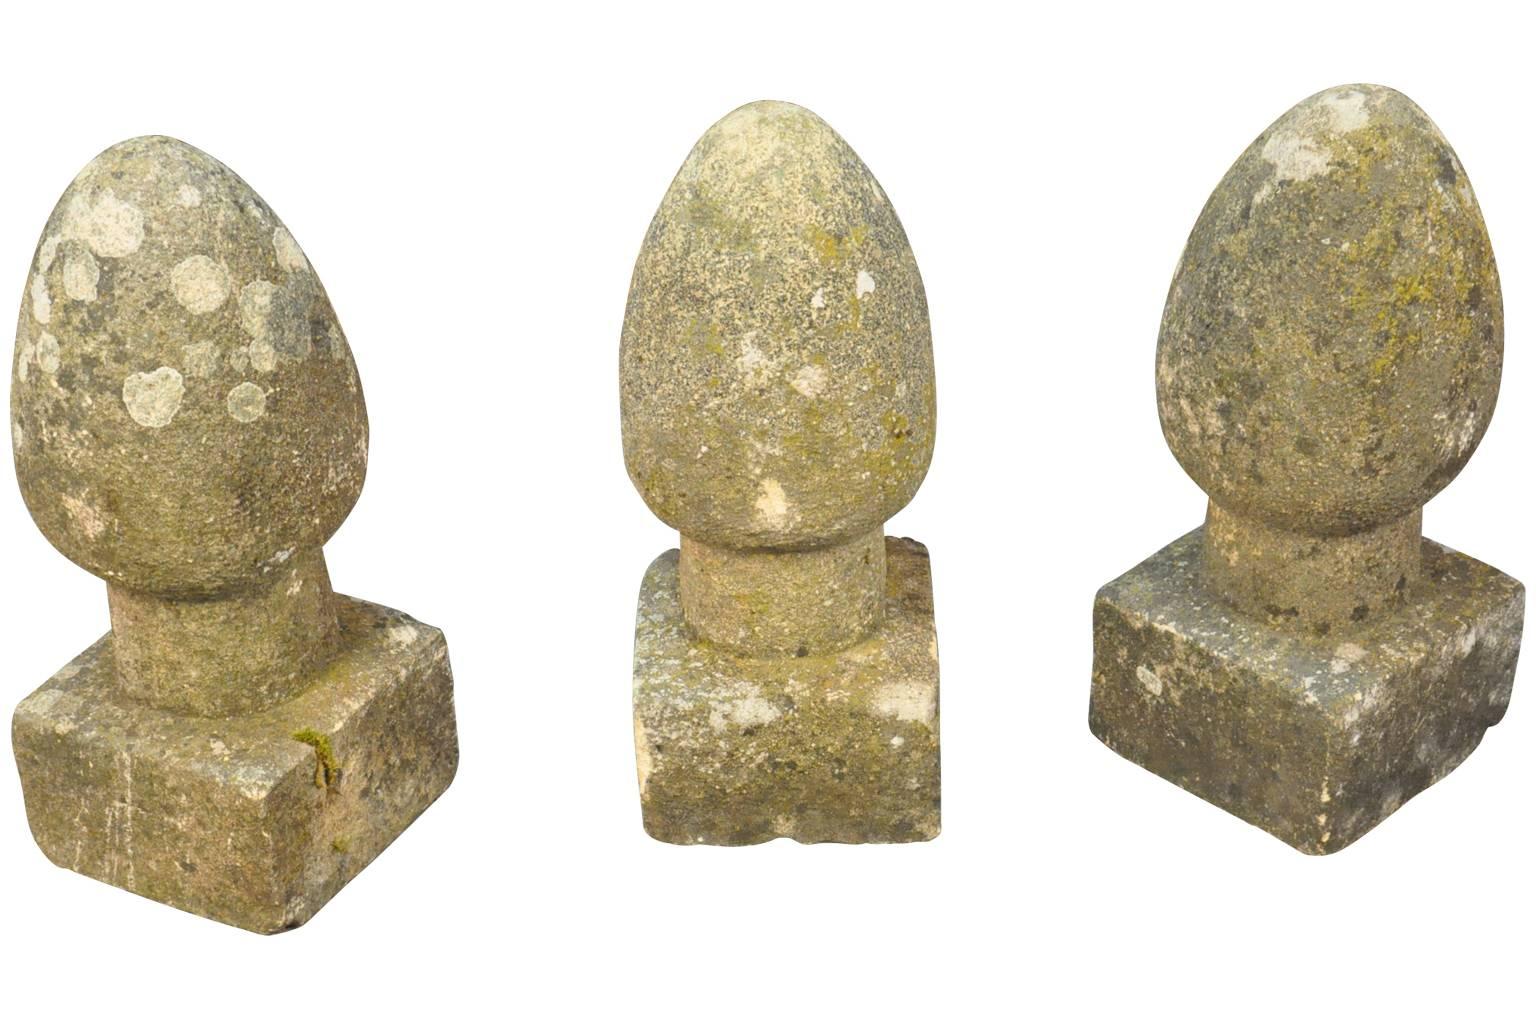 A wonderful set of three 19th century French stone garden finials. Beautifully and simply shaped in a conical orb atop a squared base. Perfect for any garden or as an interior decoration.